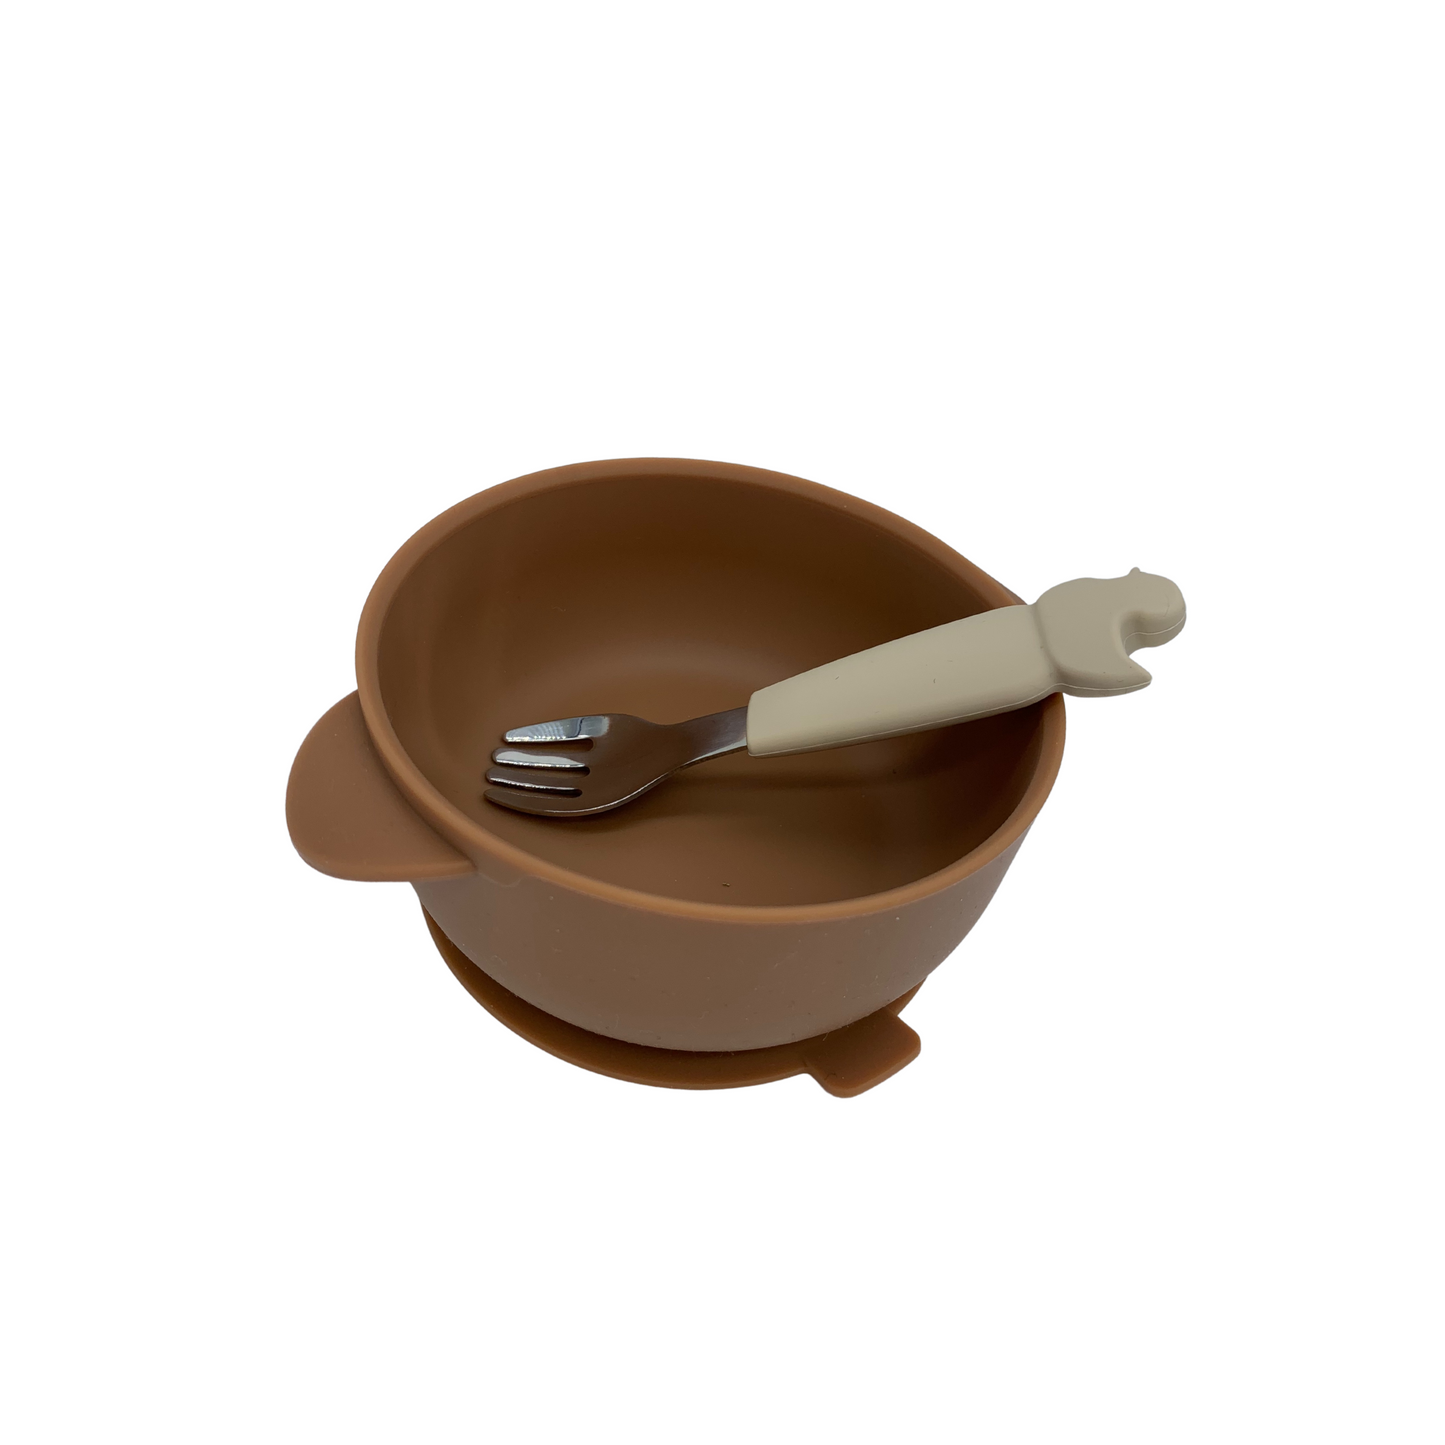 Clay bowl and stainless steel cutlery with silicone duck handle I easy to grip